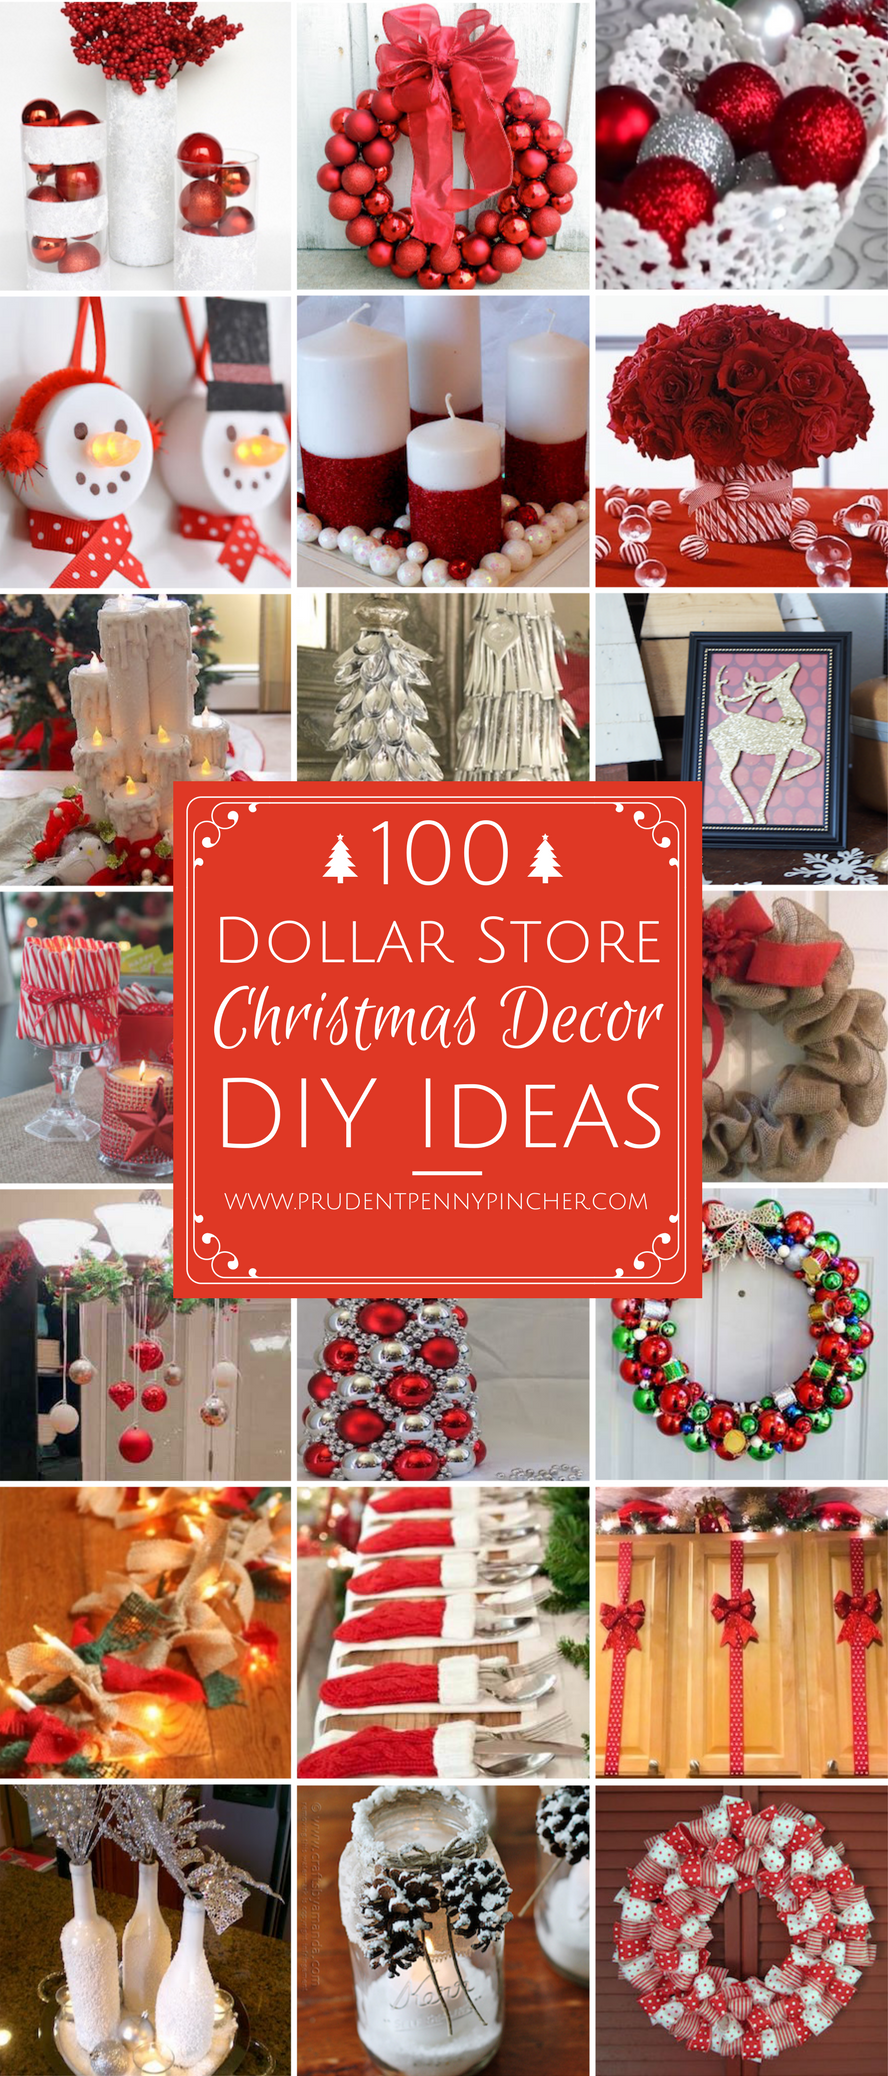 dollar christmas store decor diy tree decorations centerpieces candles gifts candle prudentpennypincher wreaths look crafts decorating xmas ornaments holiday festive